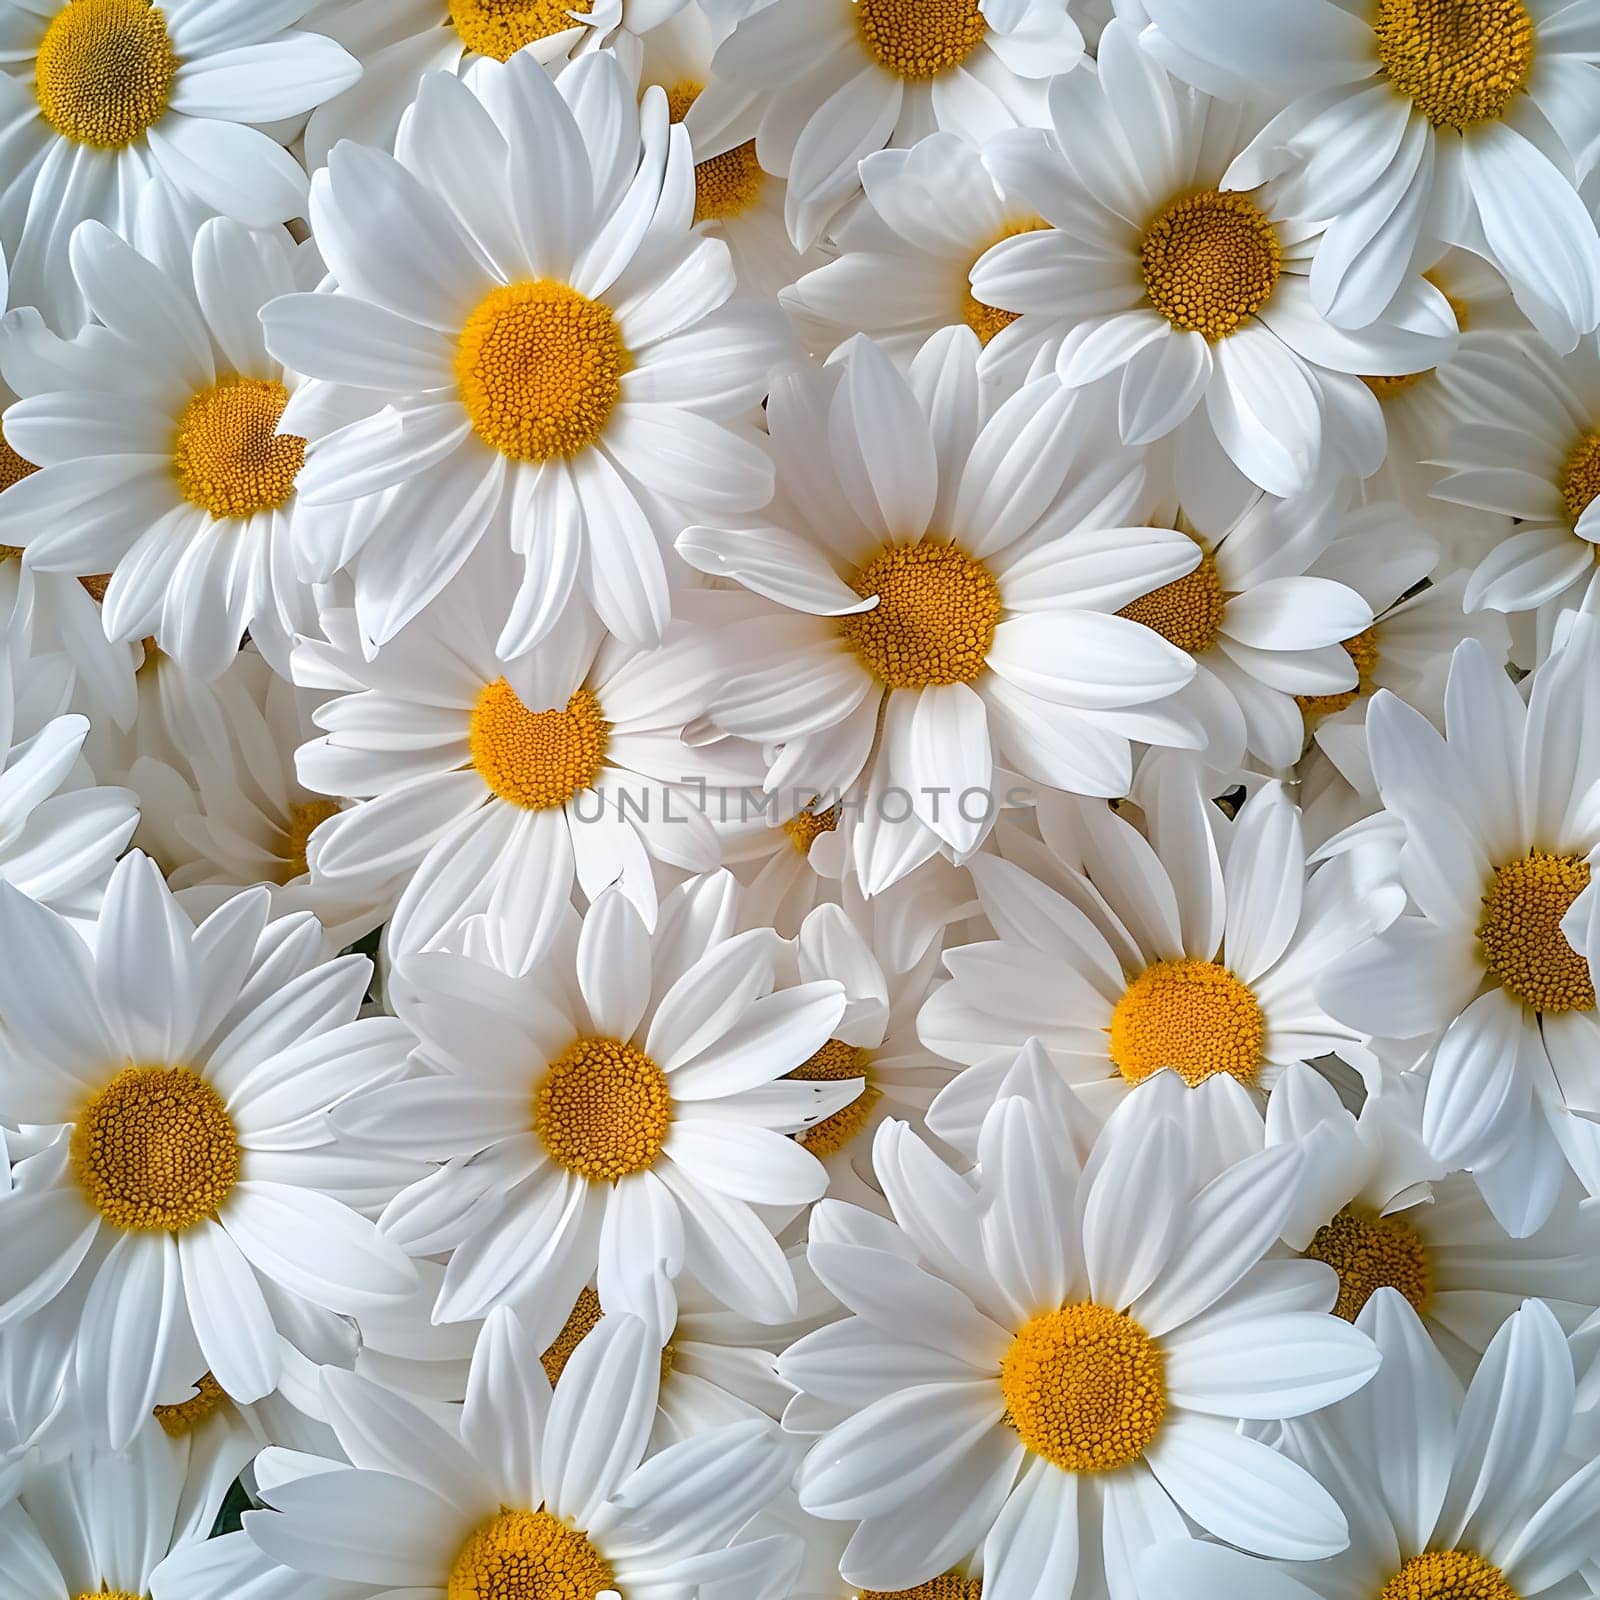 A Lot Of White Yellow Daisies or chamomile flowers - for full-frame background and seamless texture. Neural network generated image. Not based on any actual scene or pattern.